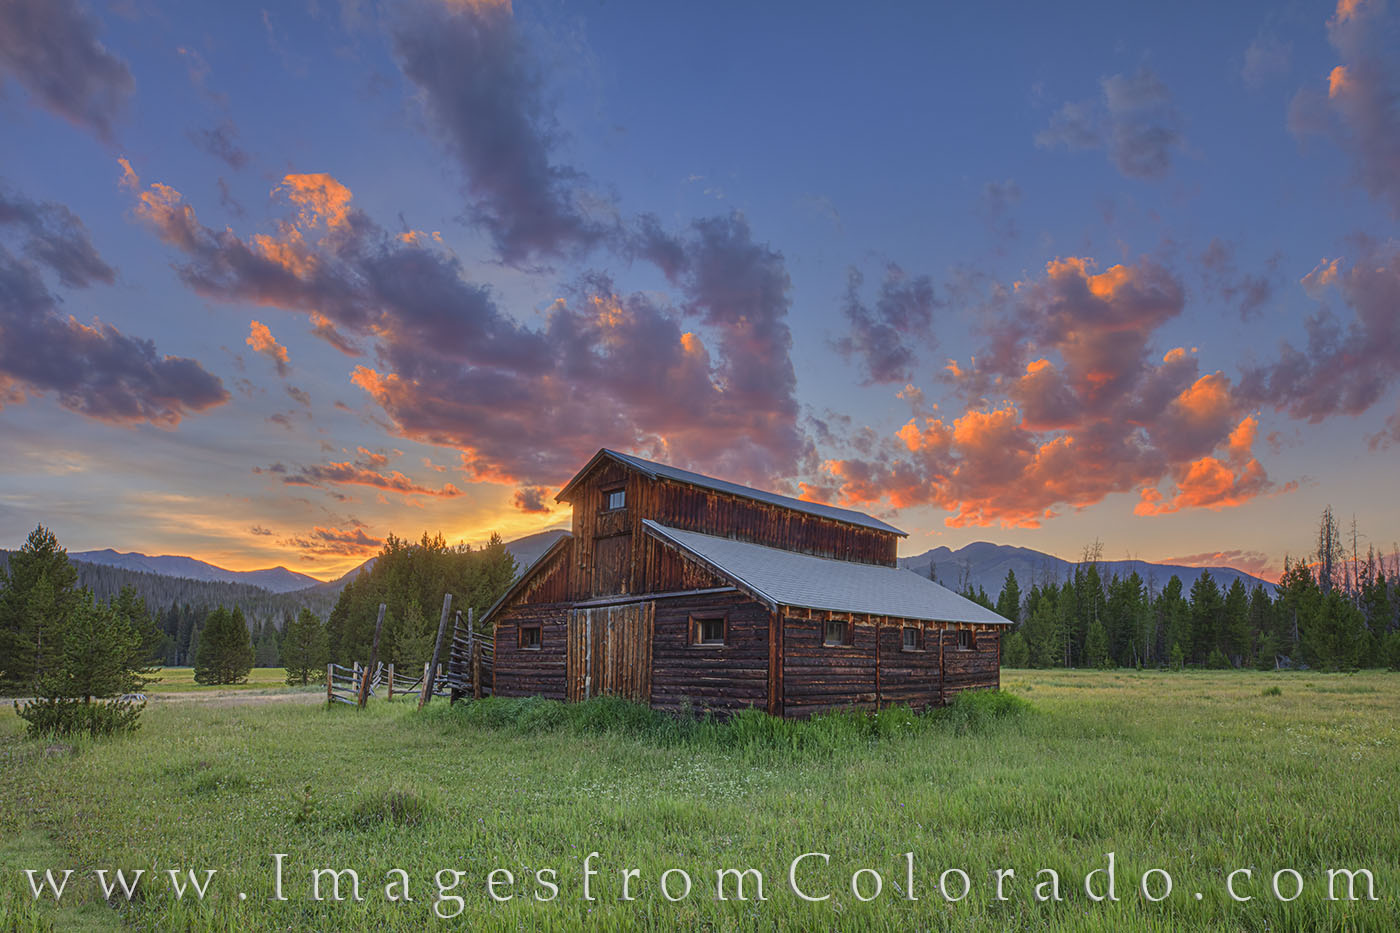 This barn is part of an old homestead from the 1900s on the west side of Rocky Mountain National Park. Just outside the town...